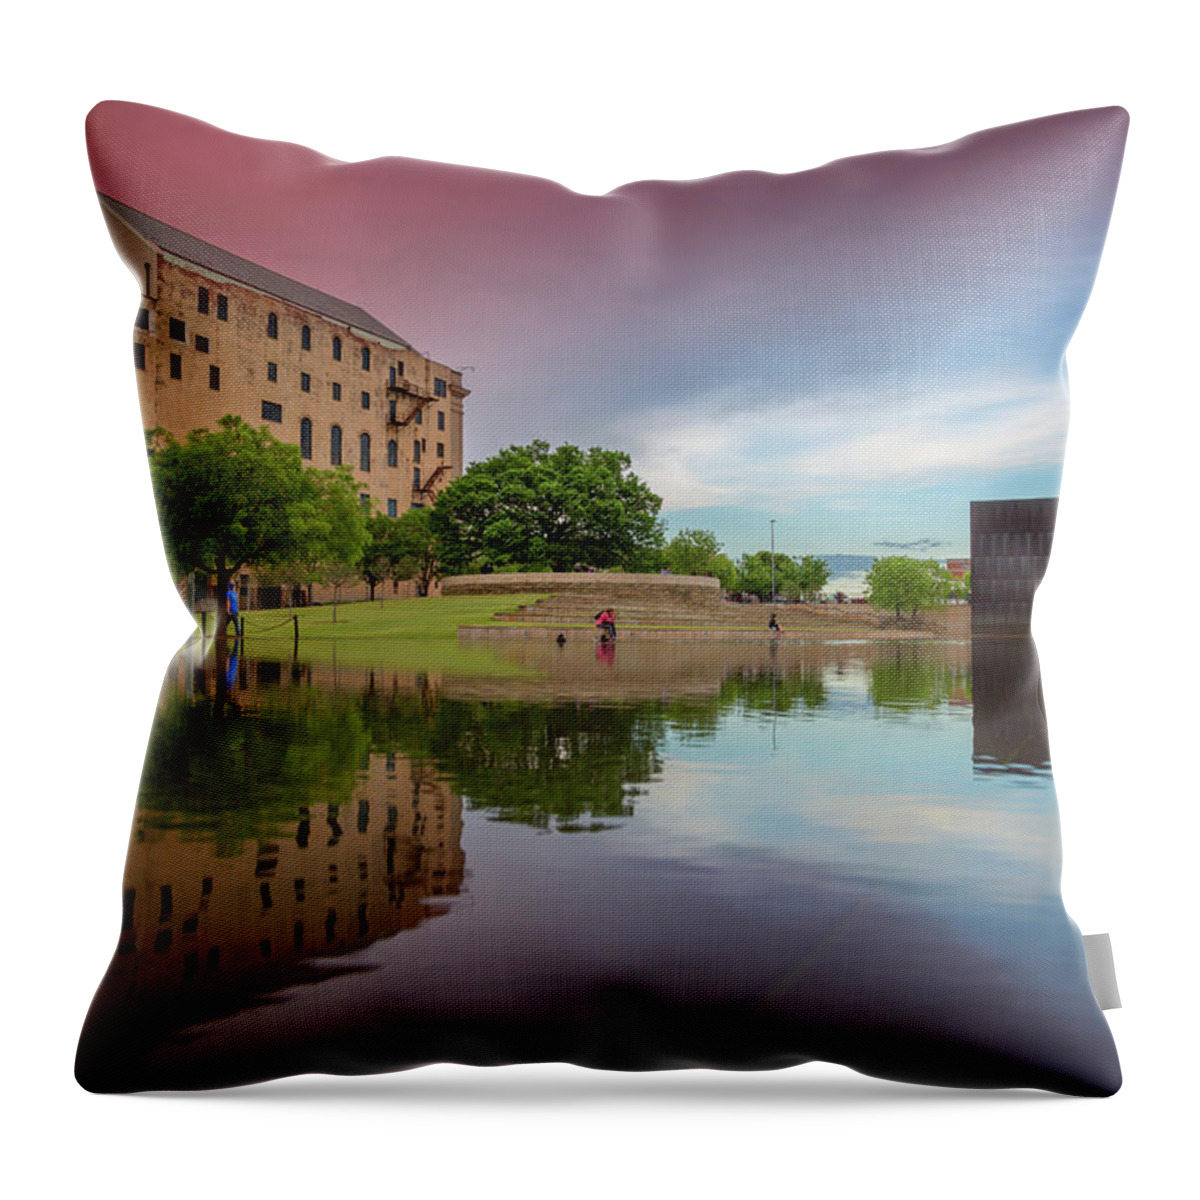 Bombing Throw Pillow featuring the photograph OKC Memorial X by Ricky Barnard